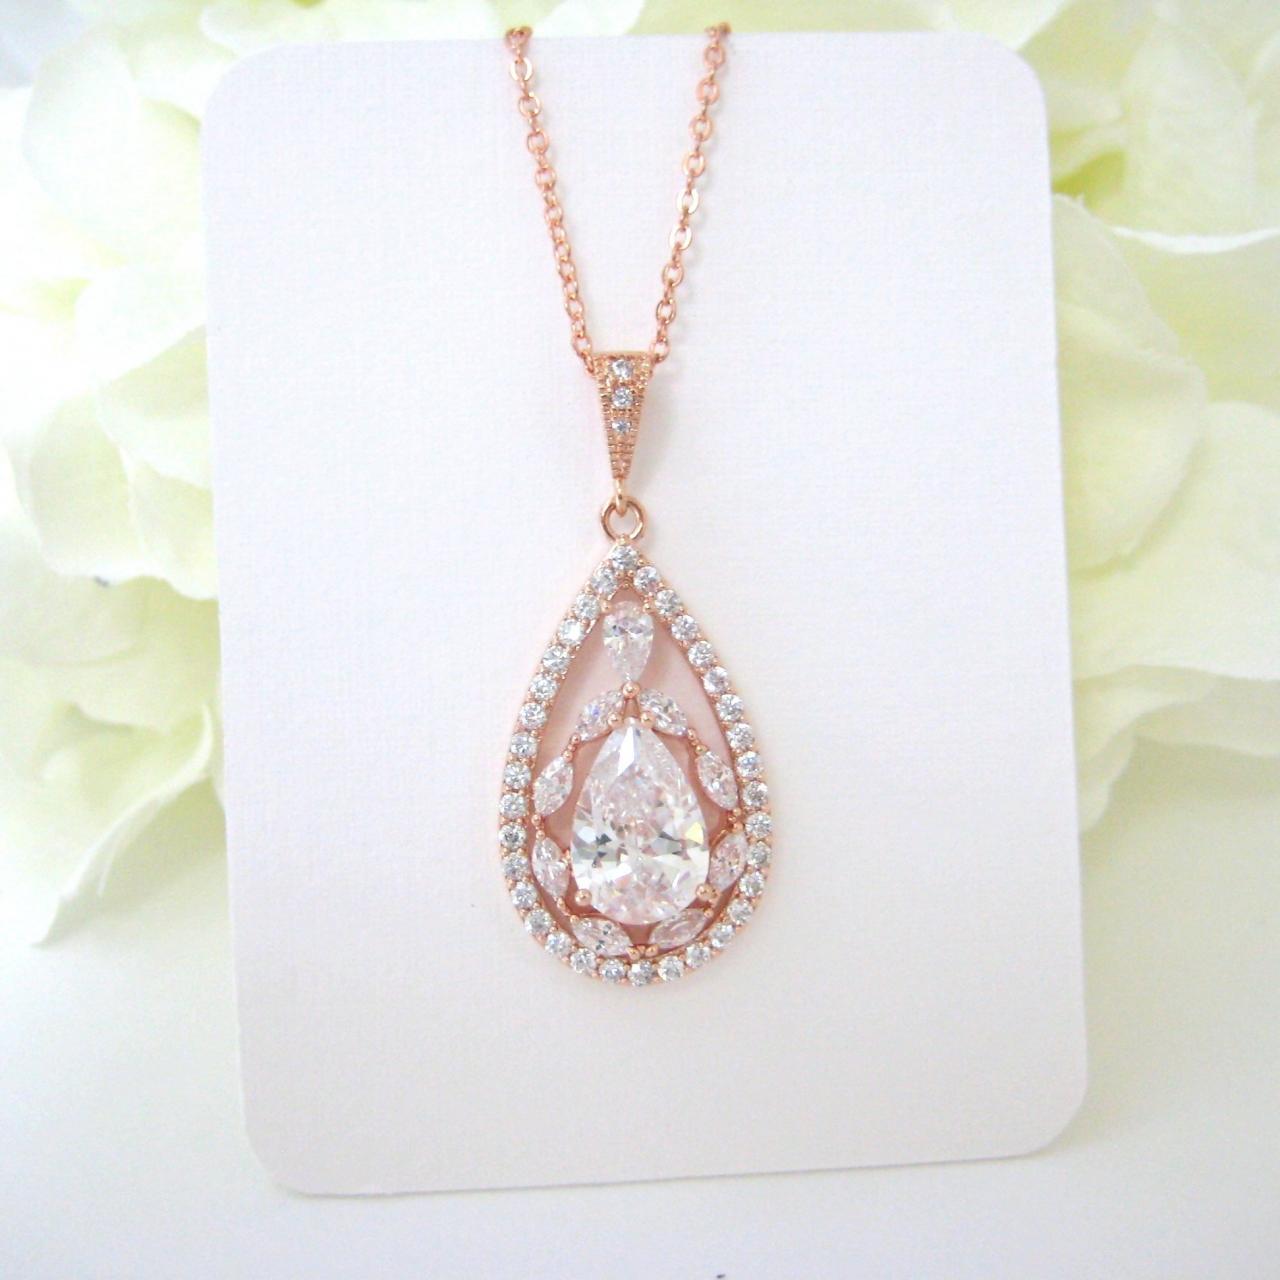 Rose Gold Bridal Crystal Necklace Cubic Zirconia Teardrop Necklace Bridal Drop Necklace Wedding Necklace Bridesmaid Gift (n065)